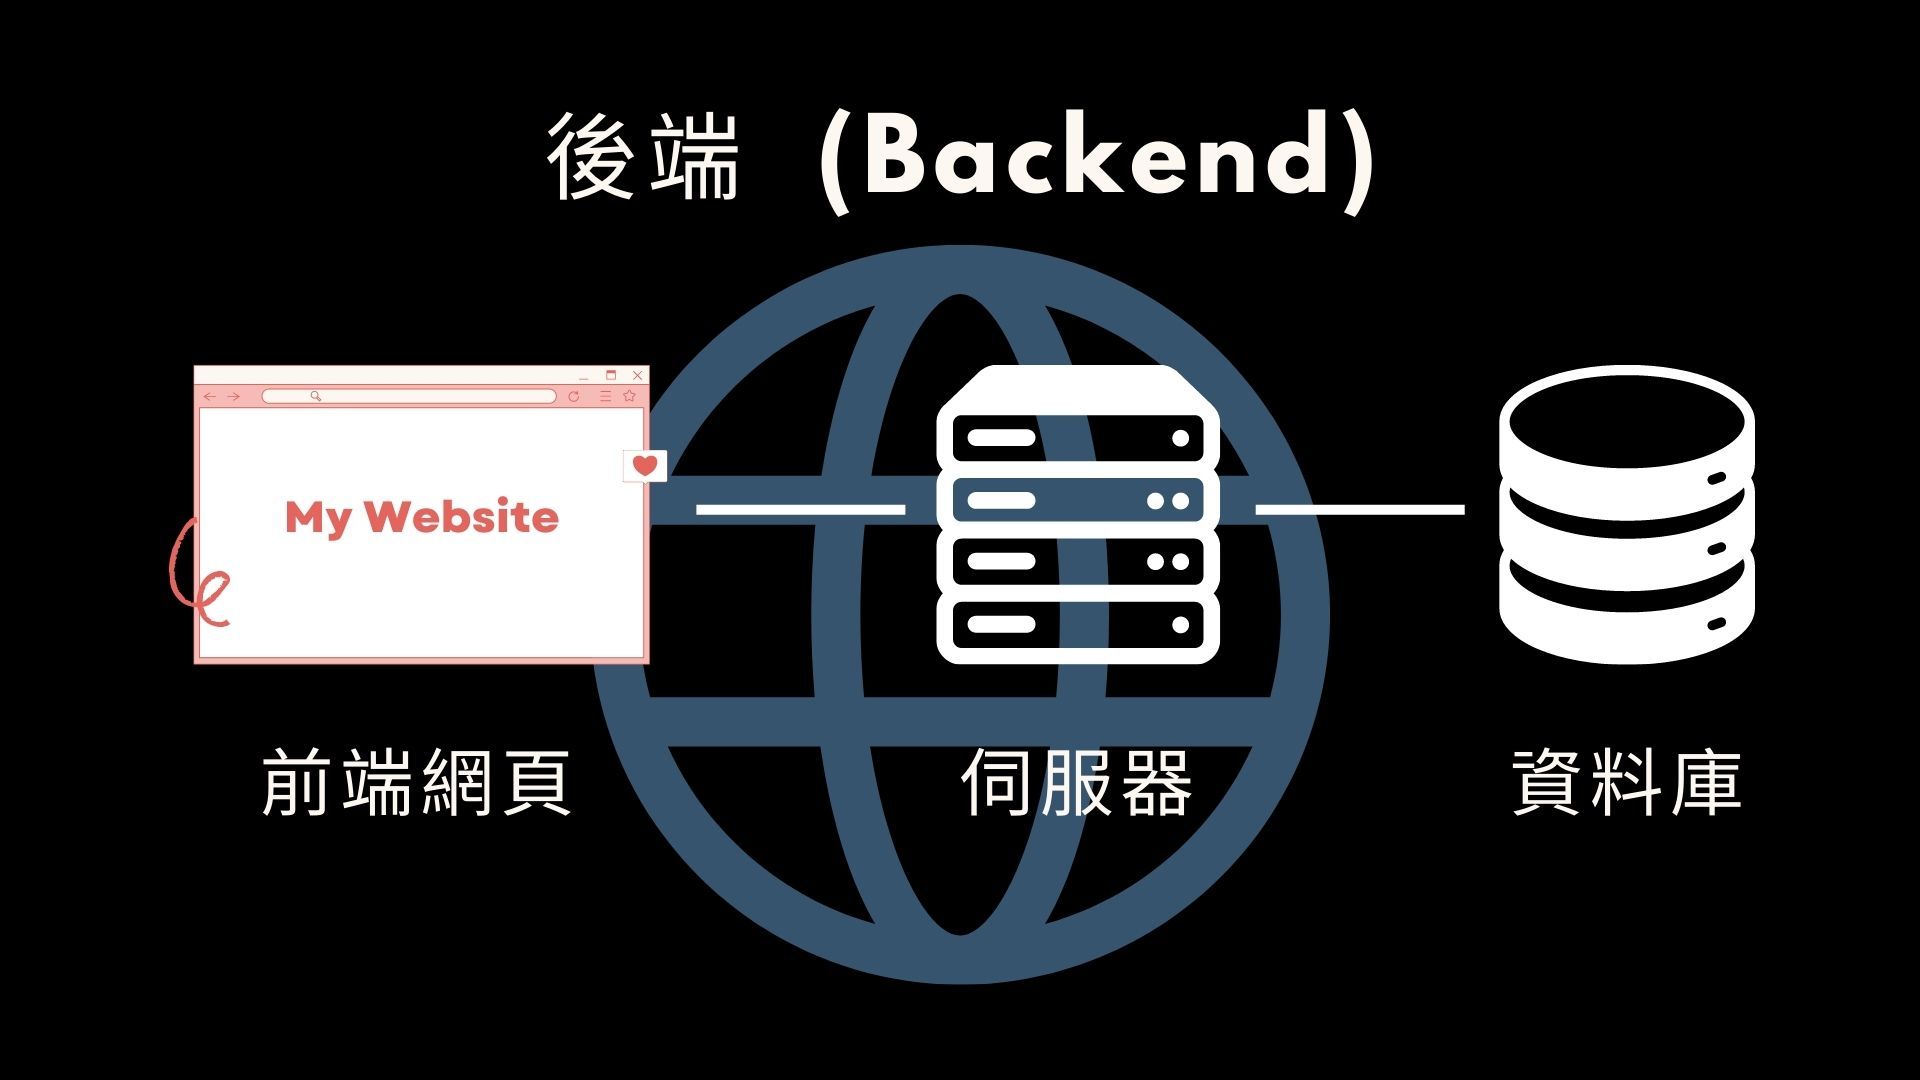 Backend Overview